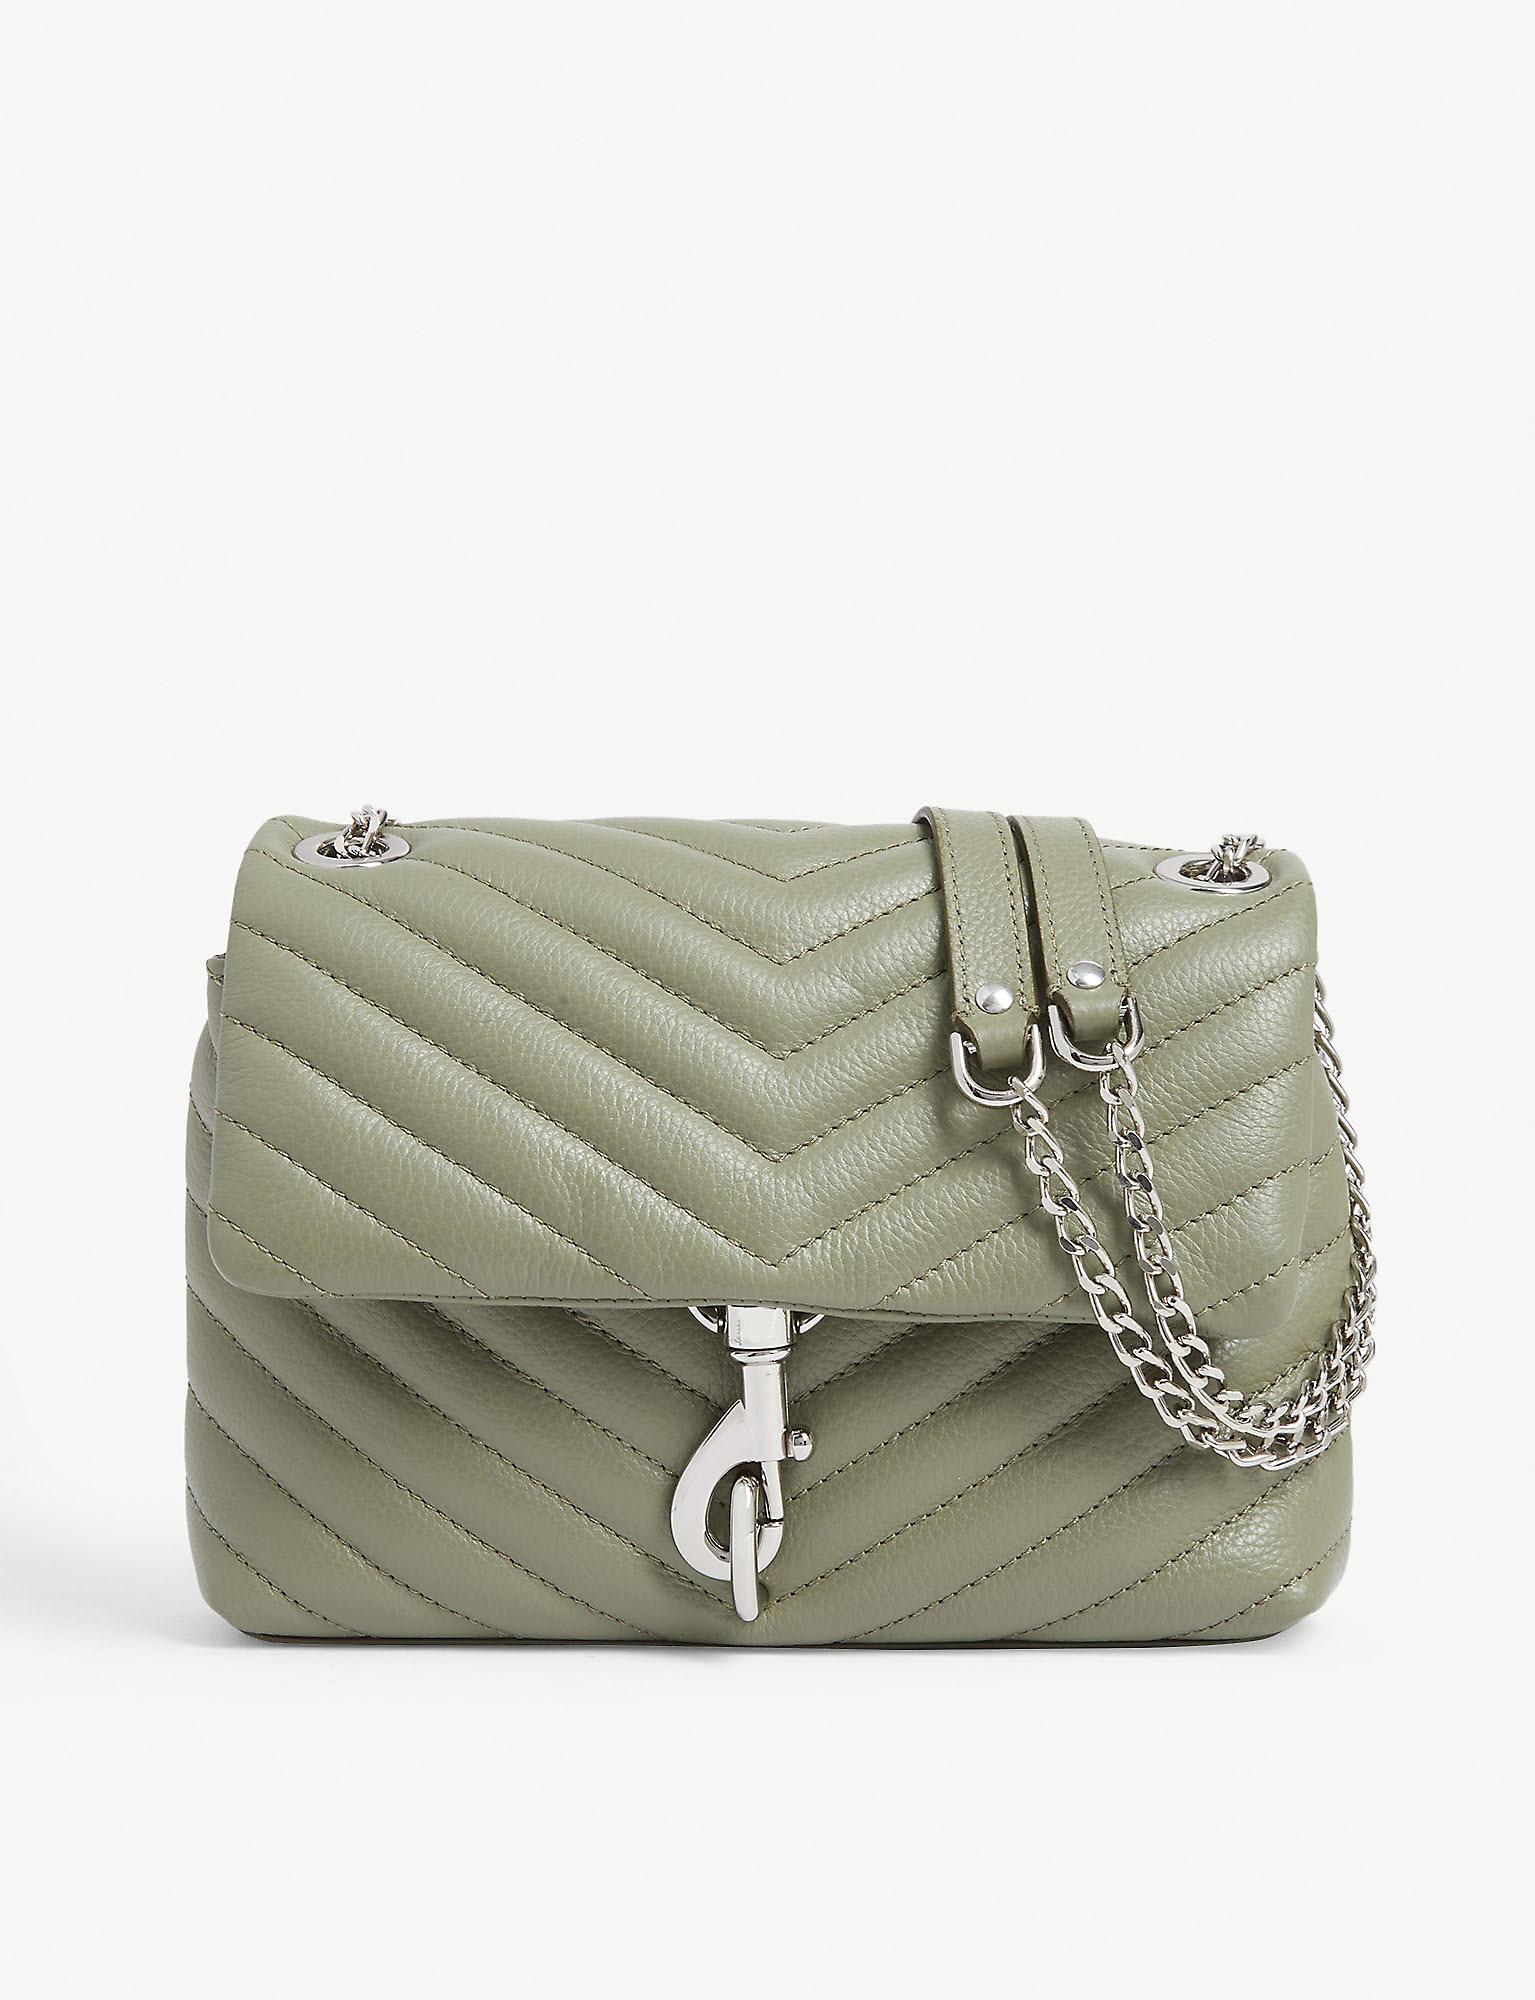 Rebecca Minkoff Edie Quilted Leather Cross-body Bag in Green - Lyst